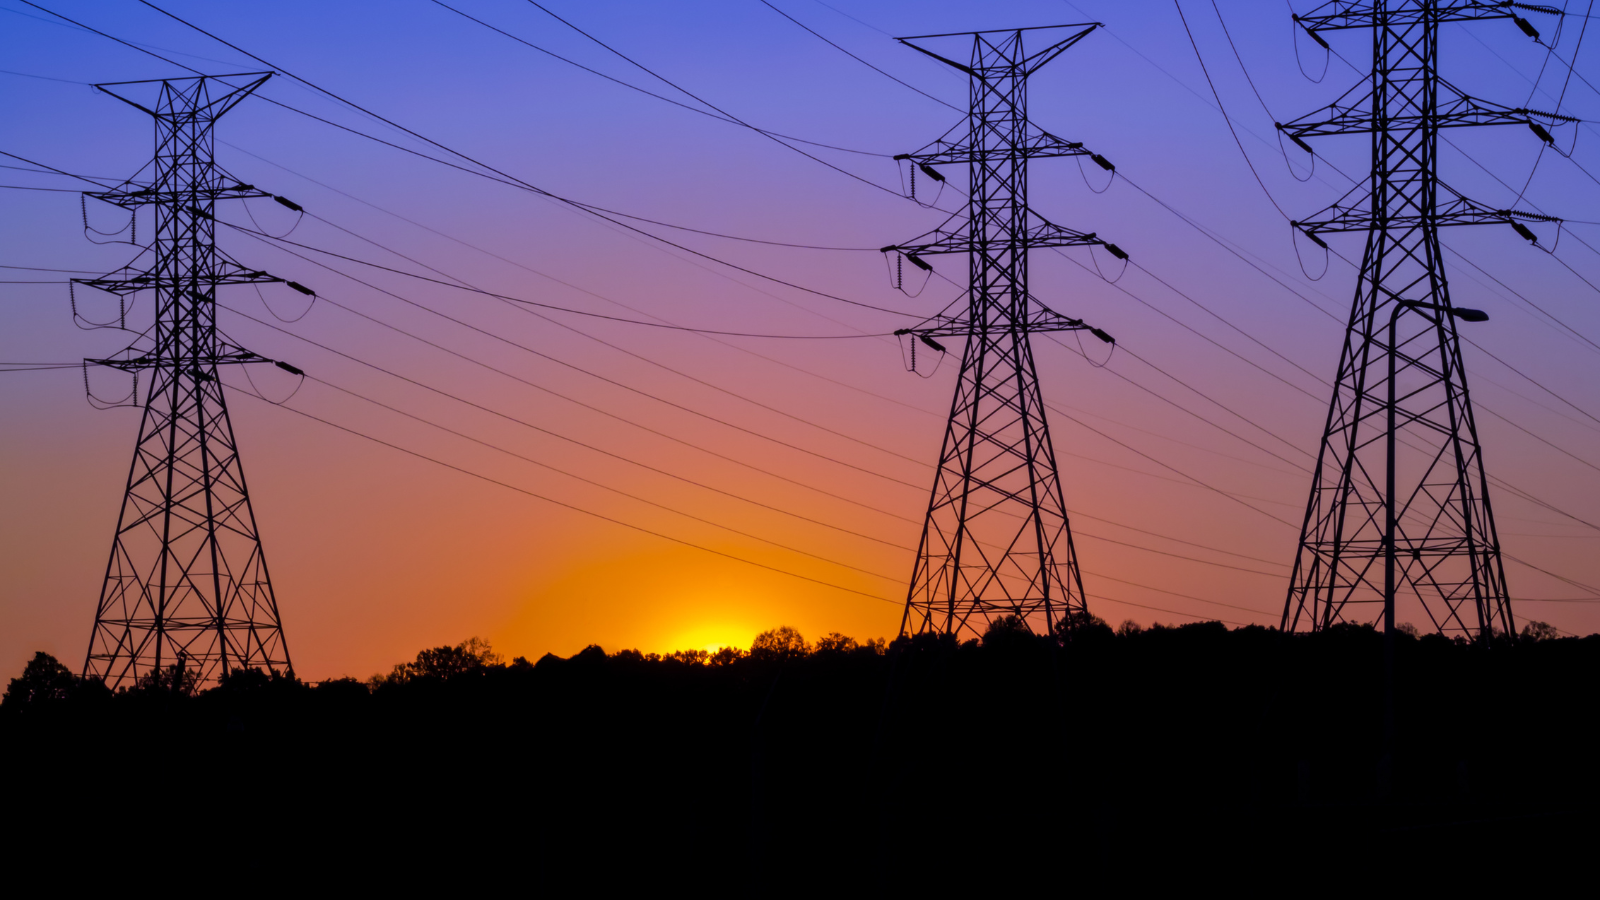 Stock image of transmission towers with the sun setting behind them. The sky is a purple, pink, and orange gradient.